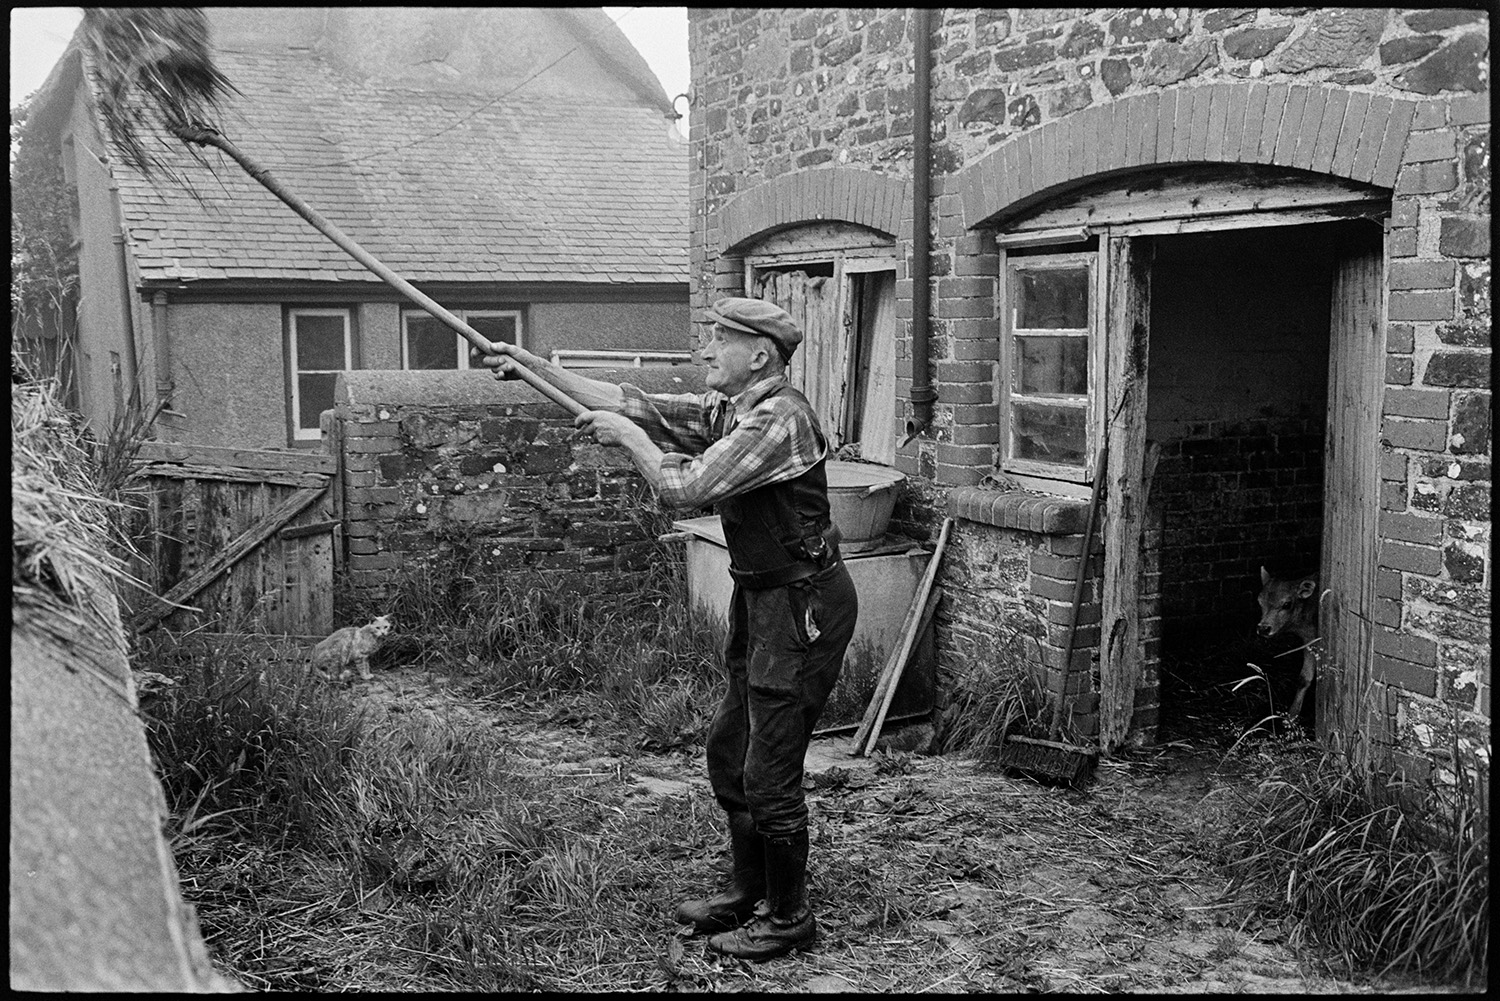 Farmer bringing in cows to be milked and clearing shed. 
[Gordon Sanders cleaning out a stone farm building at Reynards Park, Ashreigney. He is through muck onto a muck heap using a fork. A calf is looking out through the wooden doorway of the building, and a cat is sat by a gate to the yard. A brush is also propped up against the building wall.]